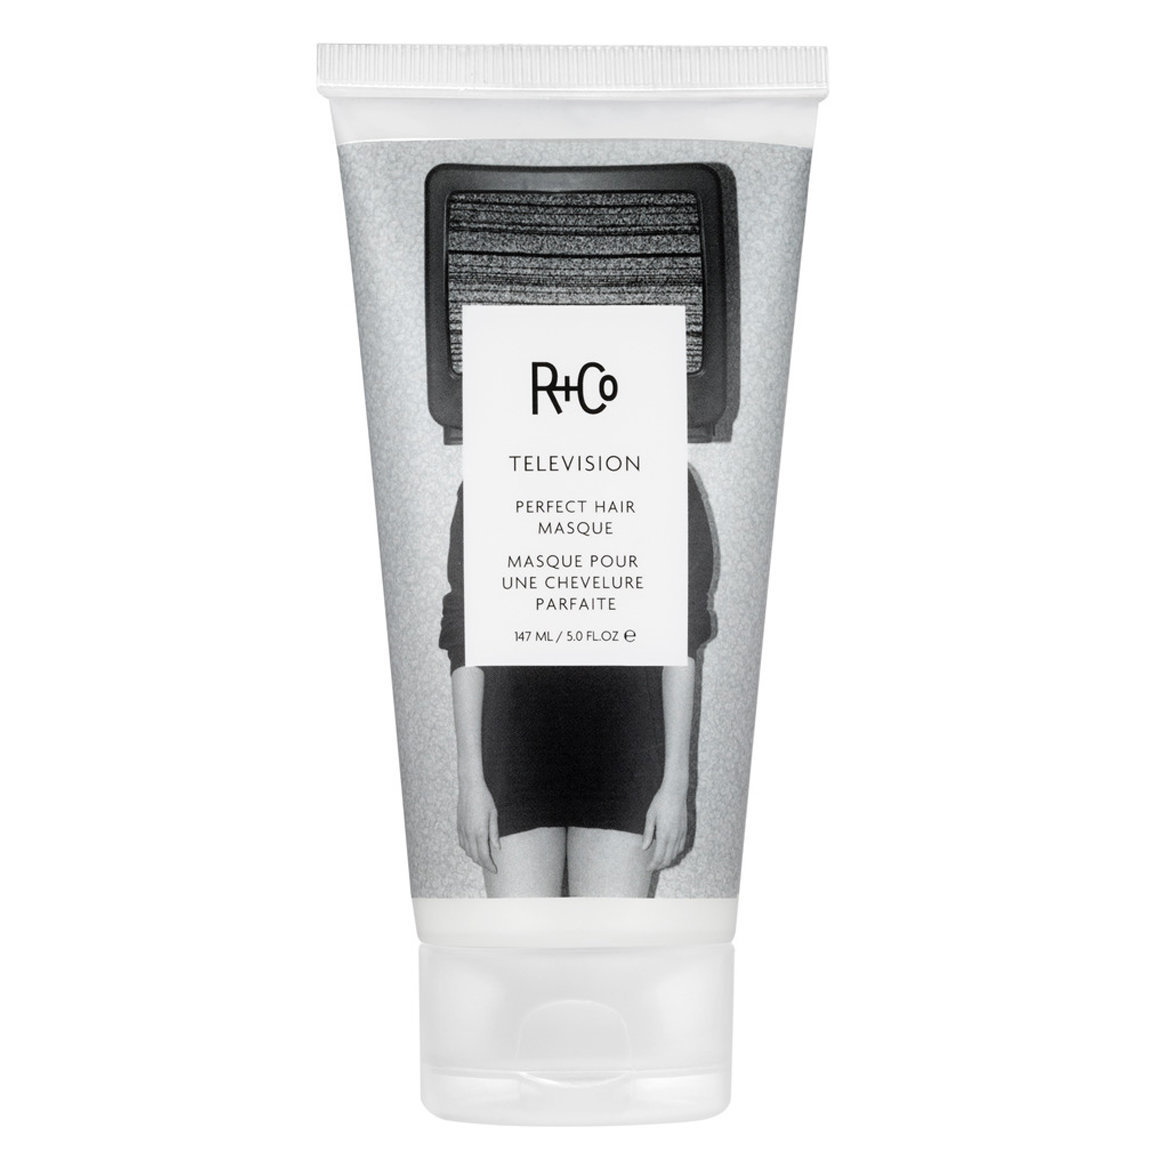 R+Co Television Perfect Hair Masque alternative view 1 - product swatch.